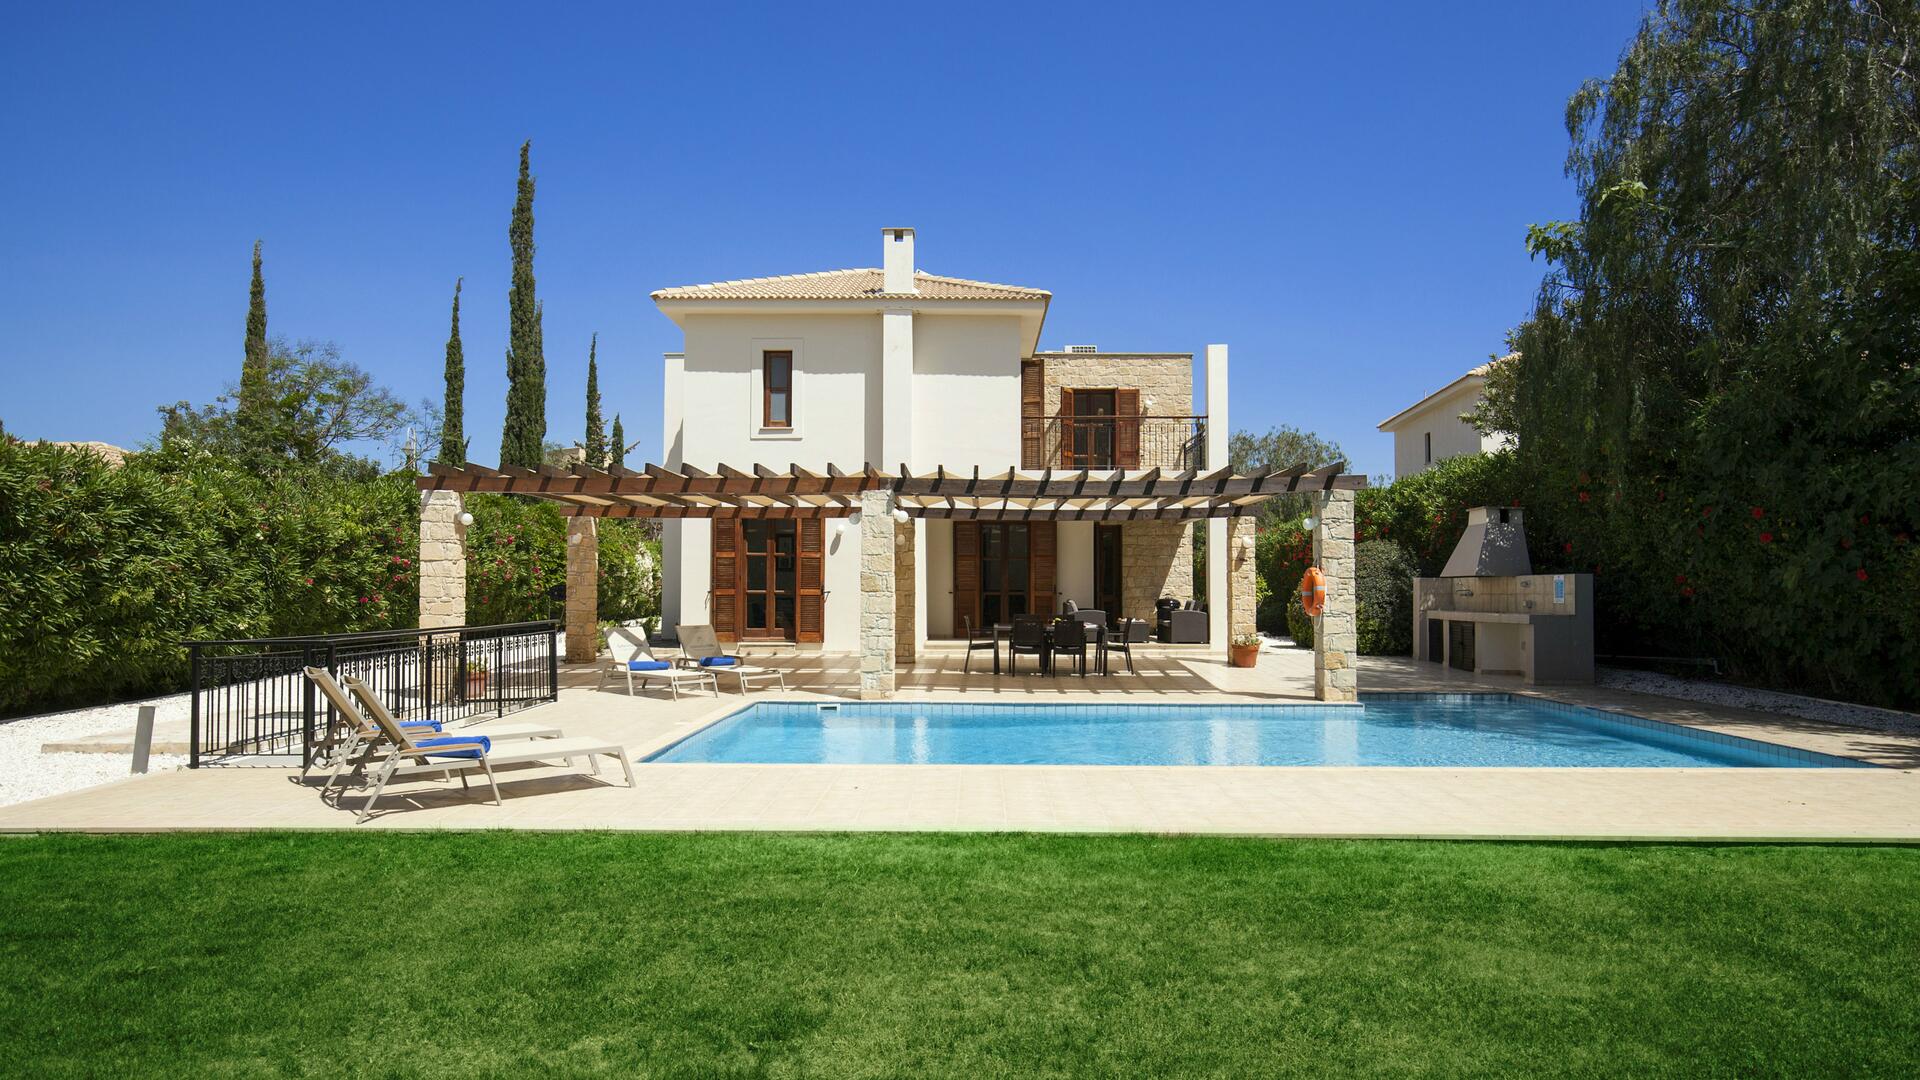 2 bedroom superior villa with private pool near Paphos